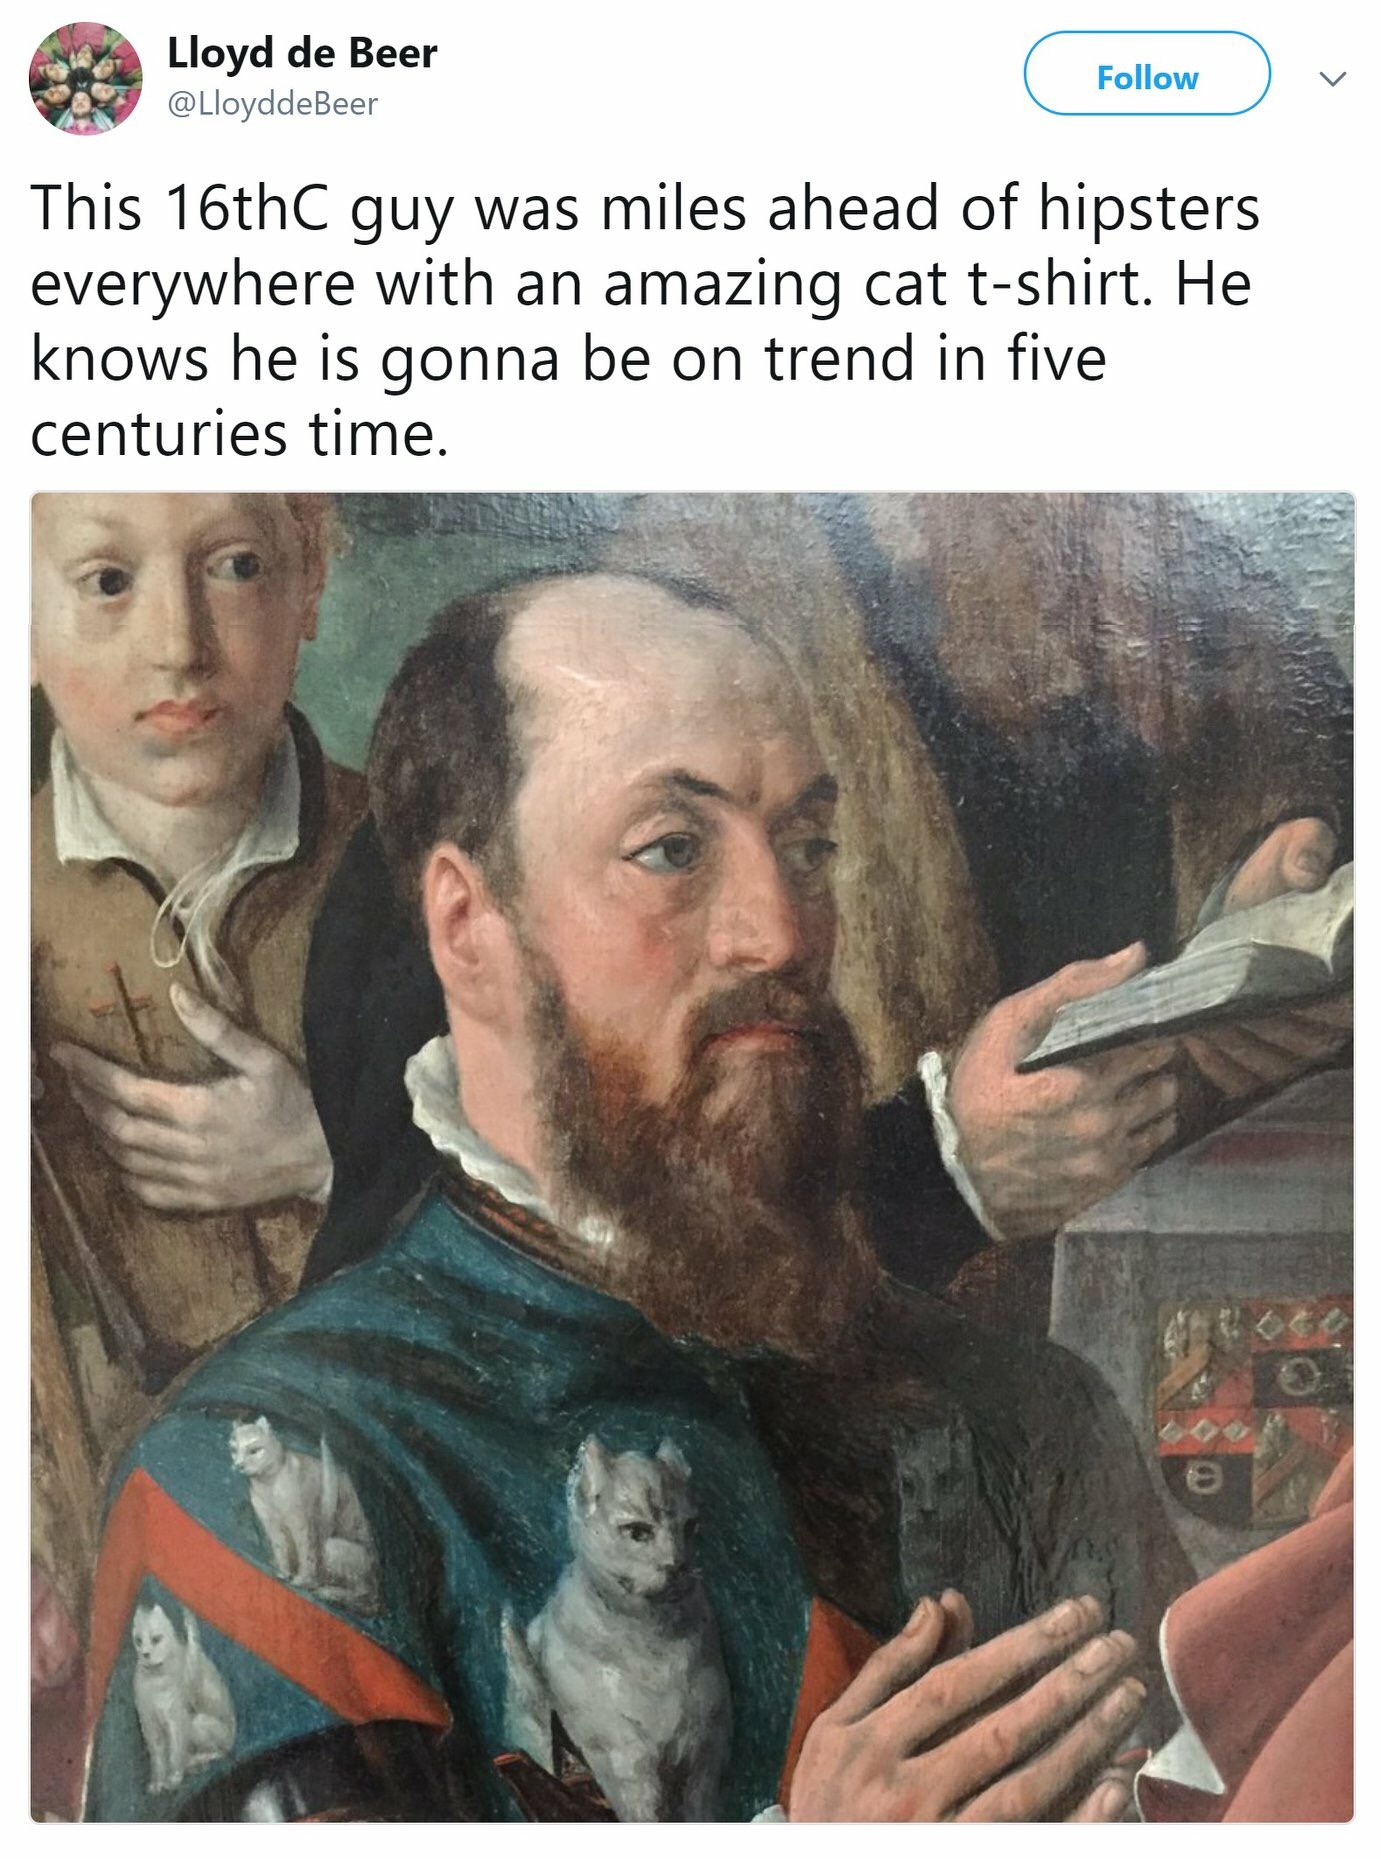 16th century cat hipster - Lloyd de Beer Lloydde Beer This 16th guy was miles ahead of hipsters everywhere with an amazing cat tshirt. He knows he is gonna be on trend in five centuries time.